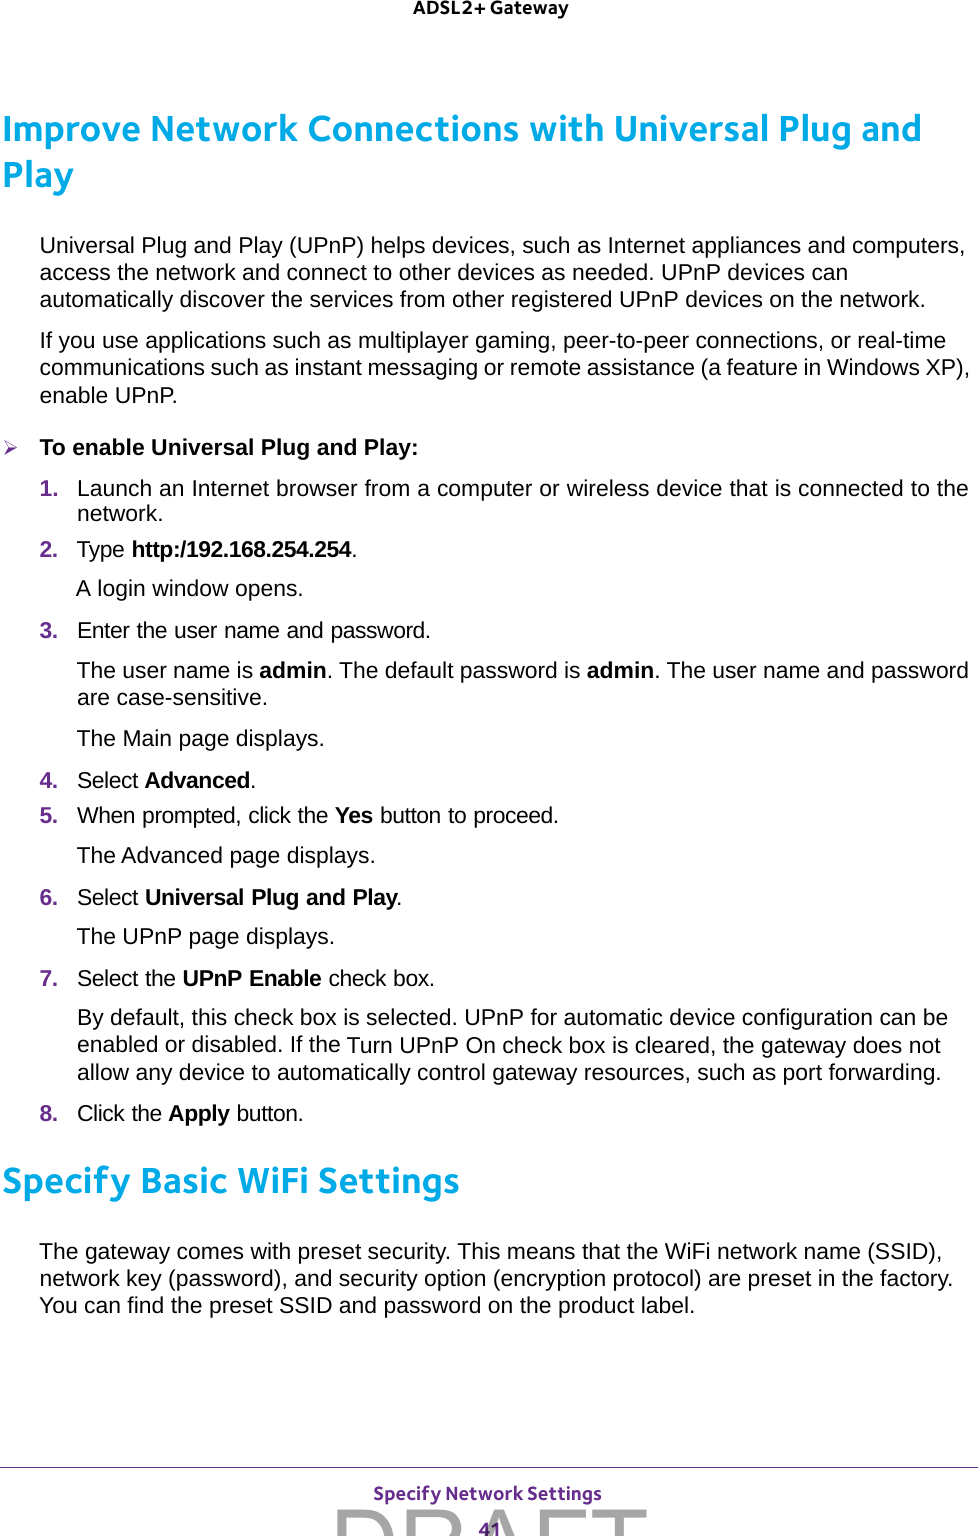 Specify Network Settings 41 ADSL2+ GatewayImprove Network Connections with Universal Plug and PlayUniversal Plug and Play (UPnP) helps devices, such as Internet appliances and computers, access the network and connect to other devices as needed. UPnP devices can automatically discover the services from other registered UPnP devices on the network.If you use applications such as multiplayer gaming, peer-to-peer connections, or real-time communications such as instant messaging or remote assistance (a feature in Windows XP), enable UPnP.To enable Universal Plug and Play:1.  Launch an Internet browser from a computer or wireless device that is connected to the network.2.  Type http:/192.168.254.254.A login window opens.3.  Enter the user name and password.The user name is admin. The default password is admin. The user name and password are case-sensitive.The Main page displays.4.  Select Advanced.5.  When prompted, click the Yes button to proceed.The Advanced page displays.6.  Select Universal Plug and Play.The UPnP page displays. 7.  Select the UPnP Enable check box.By default, this check box is selected. UPnP for automatic device configuration can be enabled or disabled. If the Turn UPnP On check box is cleared, the gateway does not allow any device to automatically control gateway resources, such as port forwarding.8.  Click the Apply button.Specify Basic WiFi SettingsThe gateway comes with preset security. This means that the WiFi network name (SSID), network key (password), and security option (encryption protocol) are preset in the factory. You can find the preset SSID and password on the product label. DRAFT